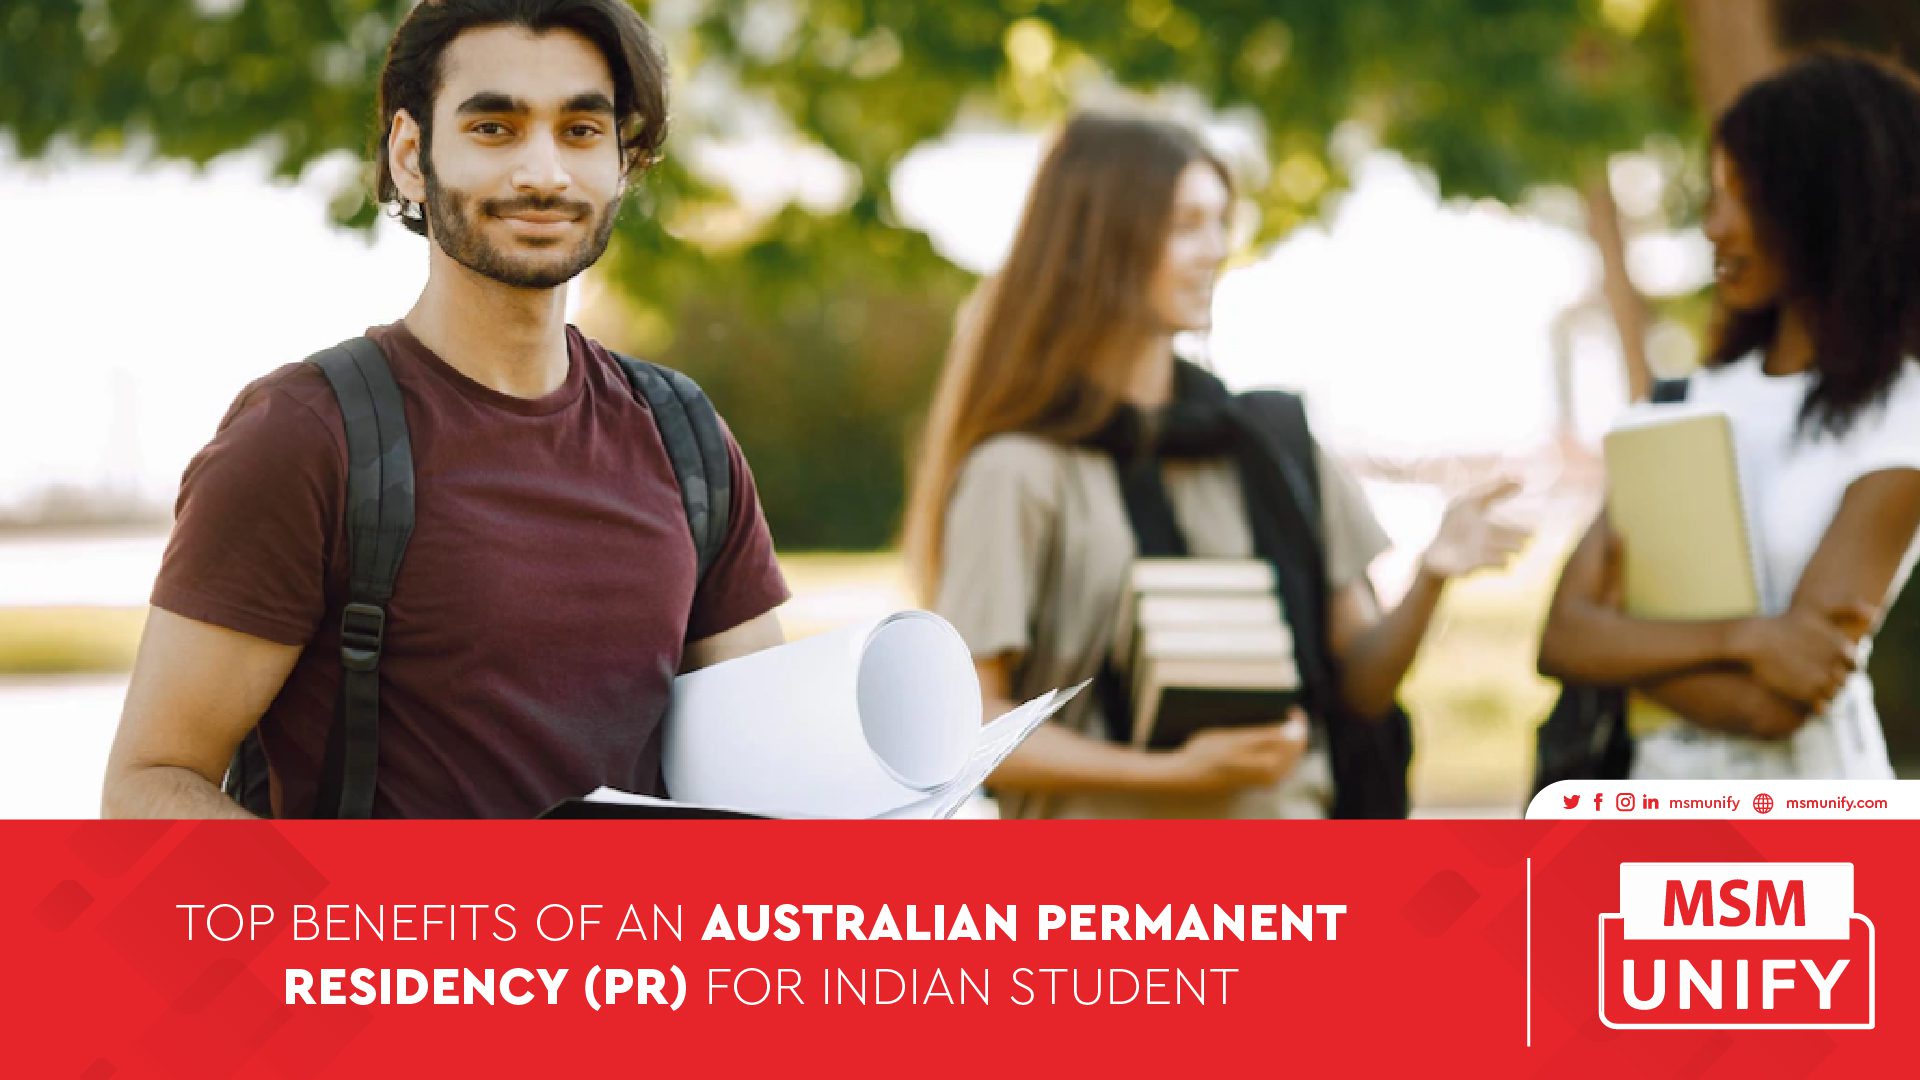 MSM Unify Top Benefits of an Australian Permanent Residency PR for Indian Student